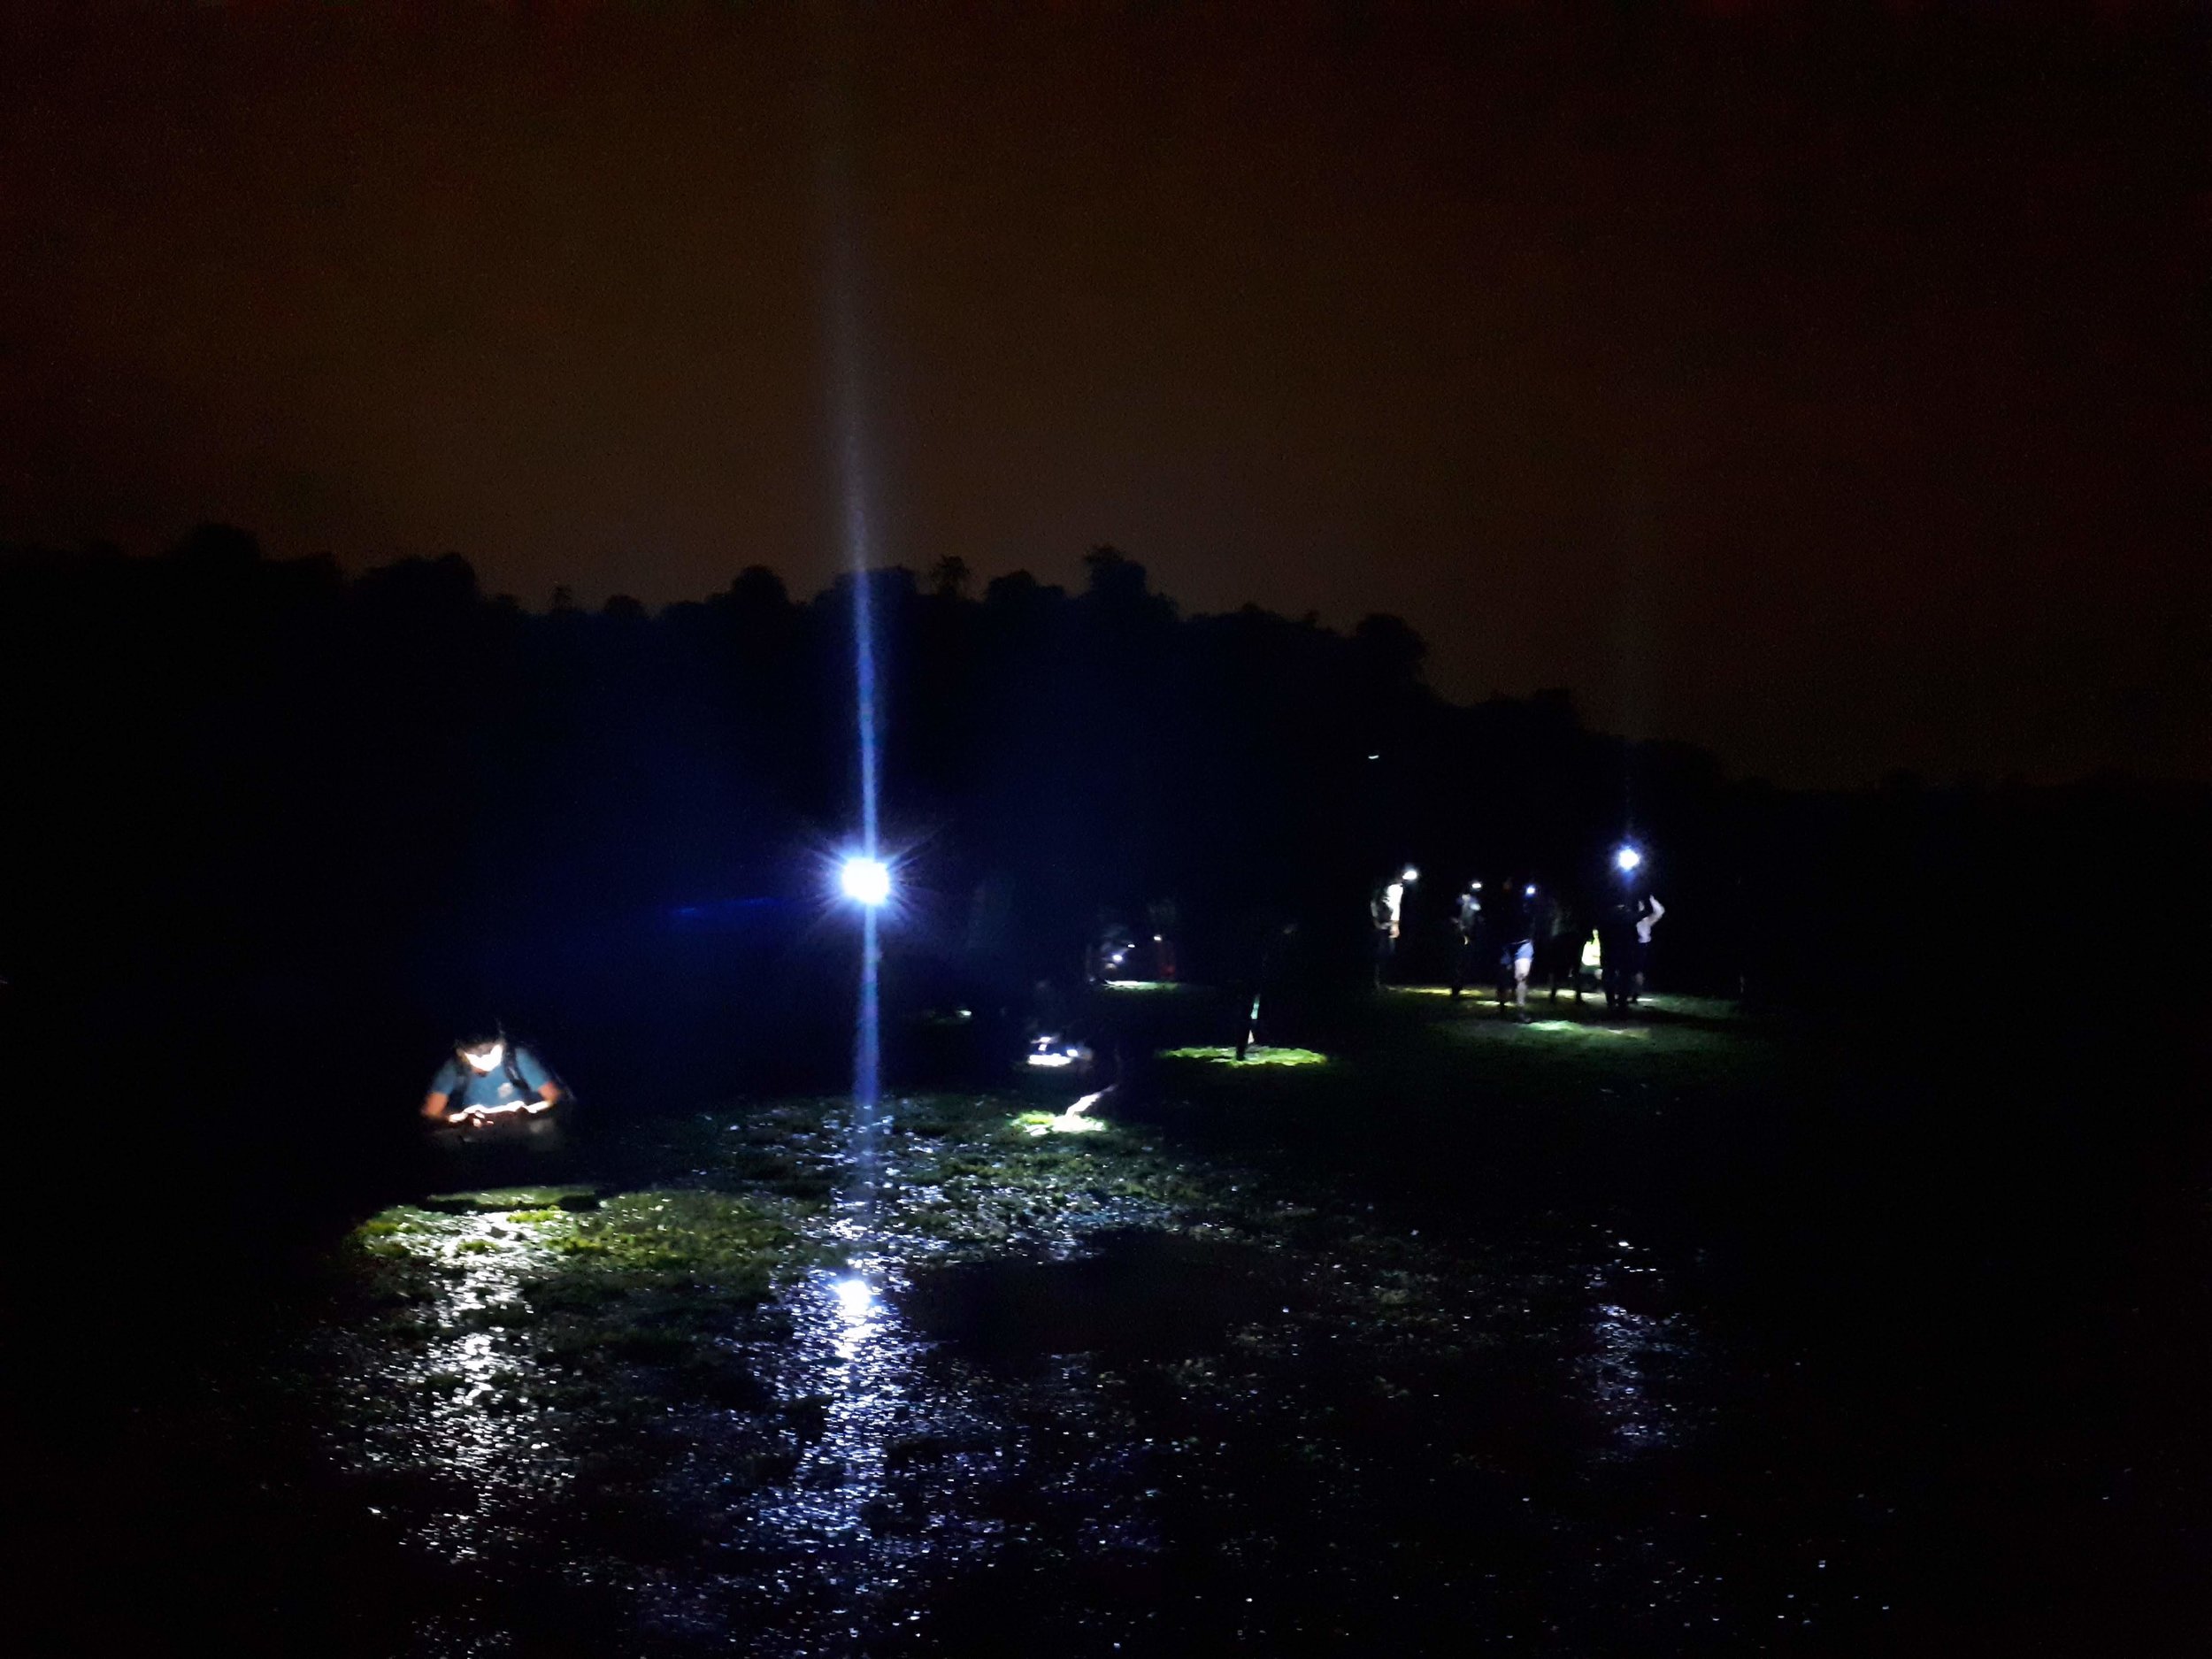 Exploring the seagrass meadow at Chek Jawa by torchlight